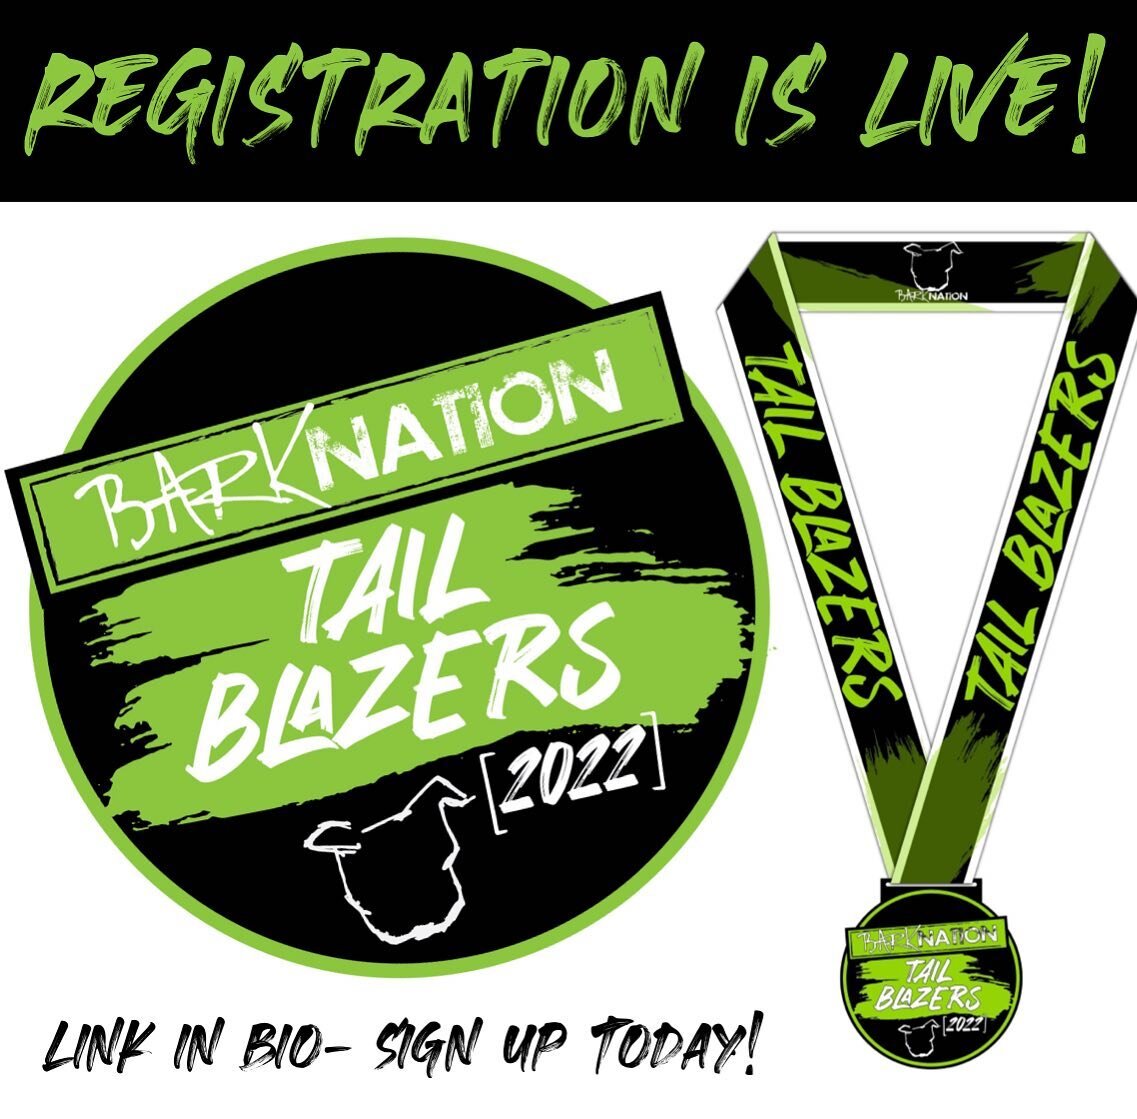 It's Tail Blazers KICK OFF DAY! 🏃&zwj;♀️🏅

Registration for our third annual Bark Nation's Tail Blazers 5k 2022
is OPEN! We're back with a new design, even cooler prizes, and a bigger fundraising goal than ever to help the survivors we serve!

Grab